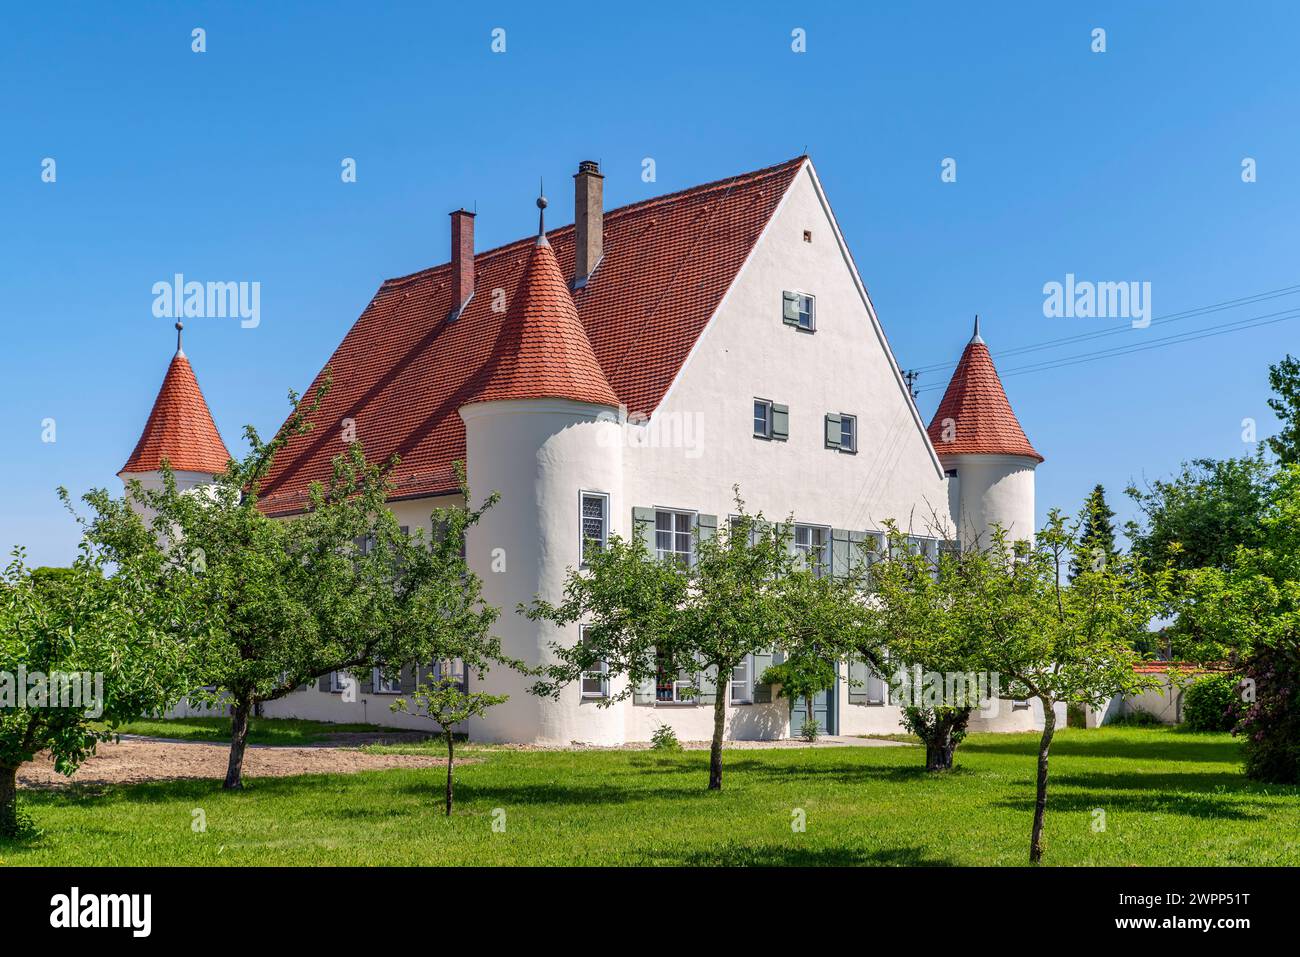 Berkheim, the rectory which was built by the Rot monastery in 1529 and baroqueized in the 17th century. It got its castle-like appearance from the four corner towers that were added in the late 18th century. Stock Photo